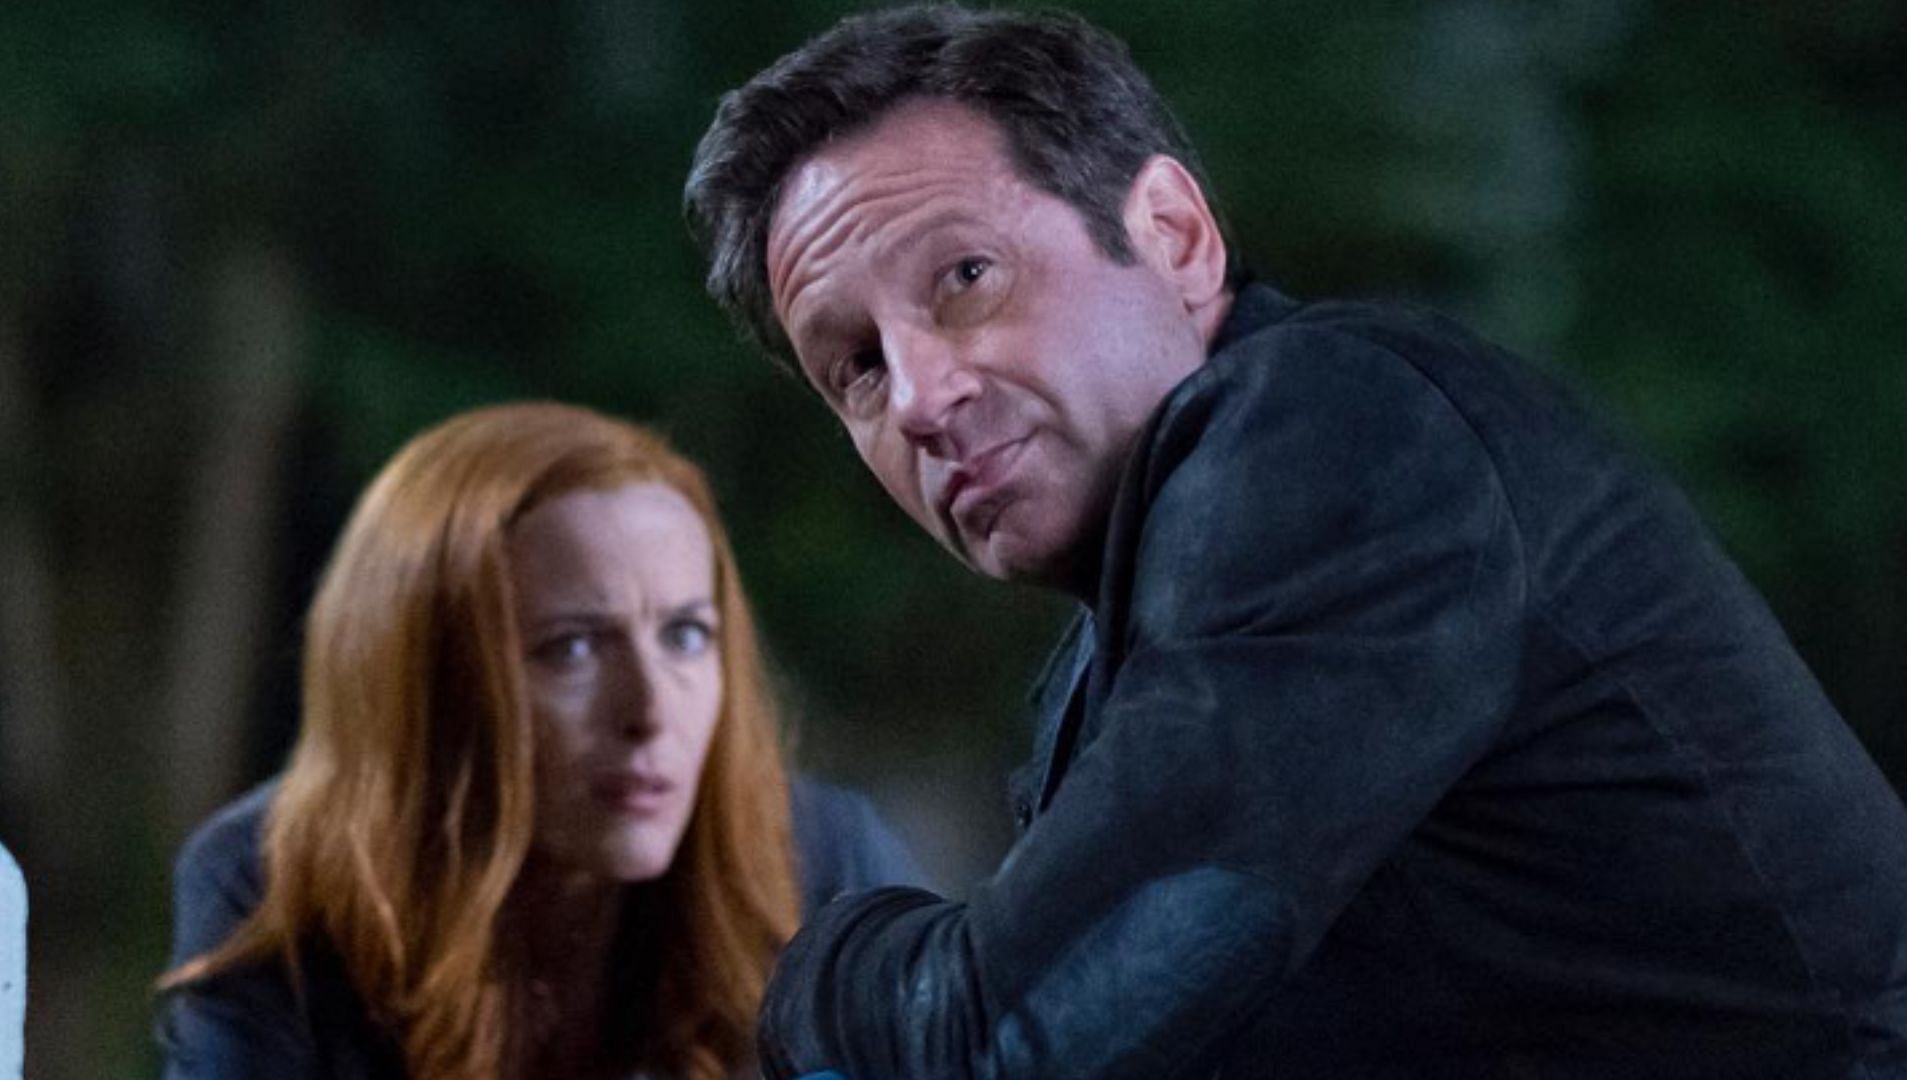 David Duchovny and Gillian Anderson From X-Files (Image via Instagram @thexfilestv)